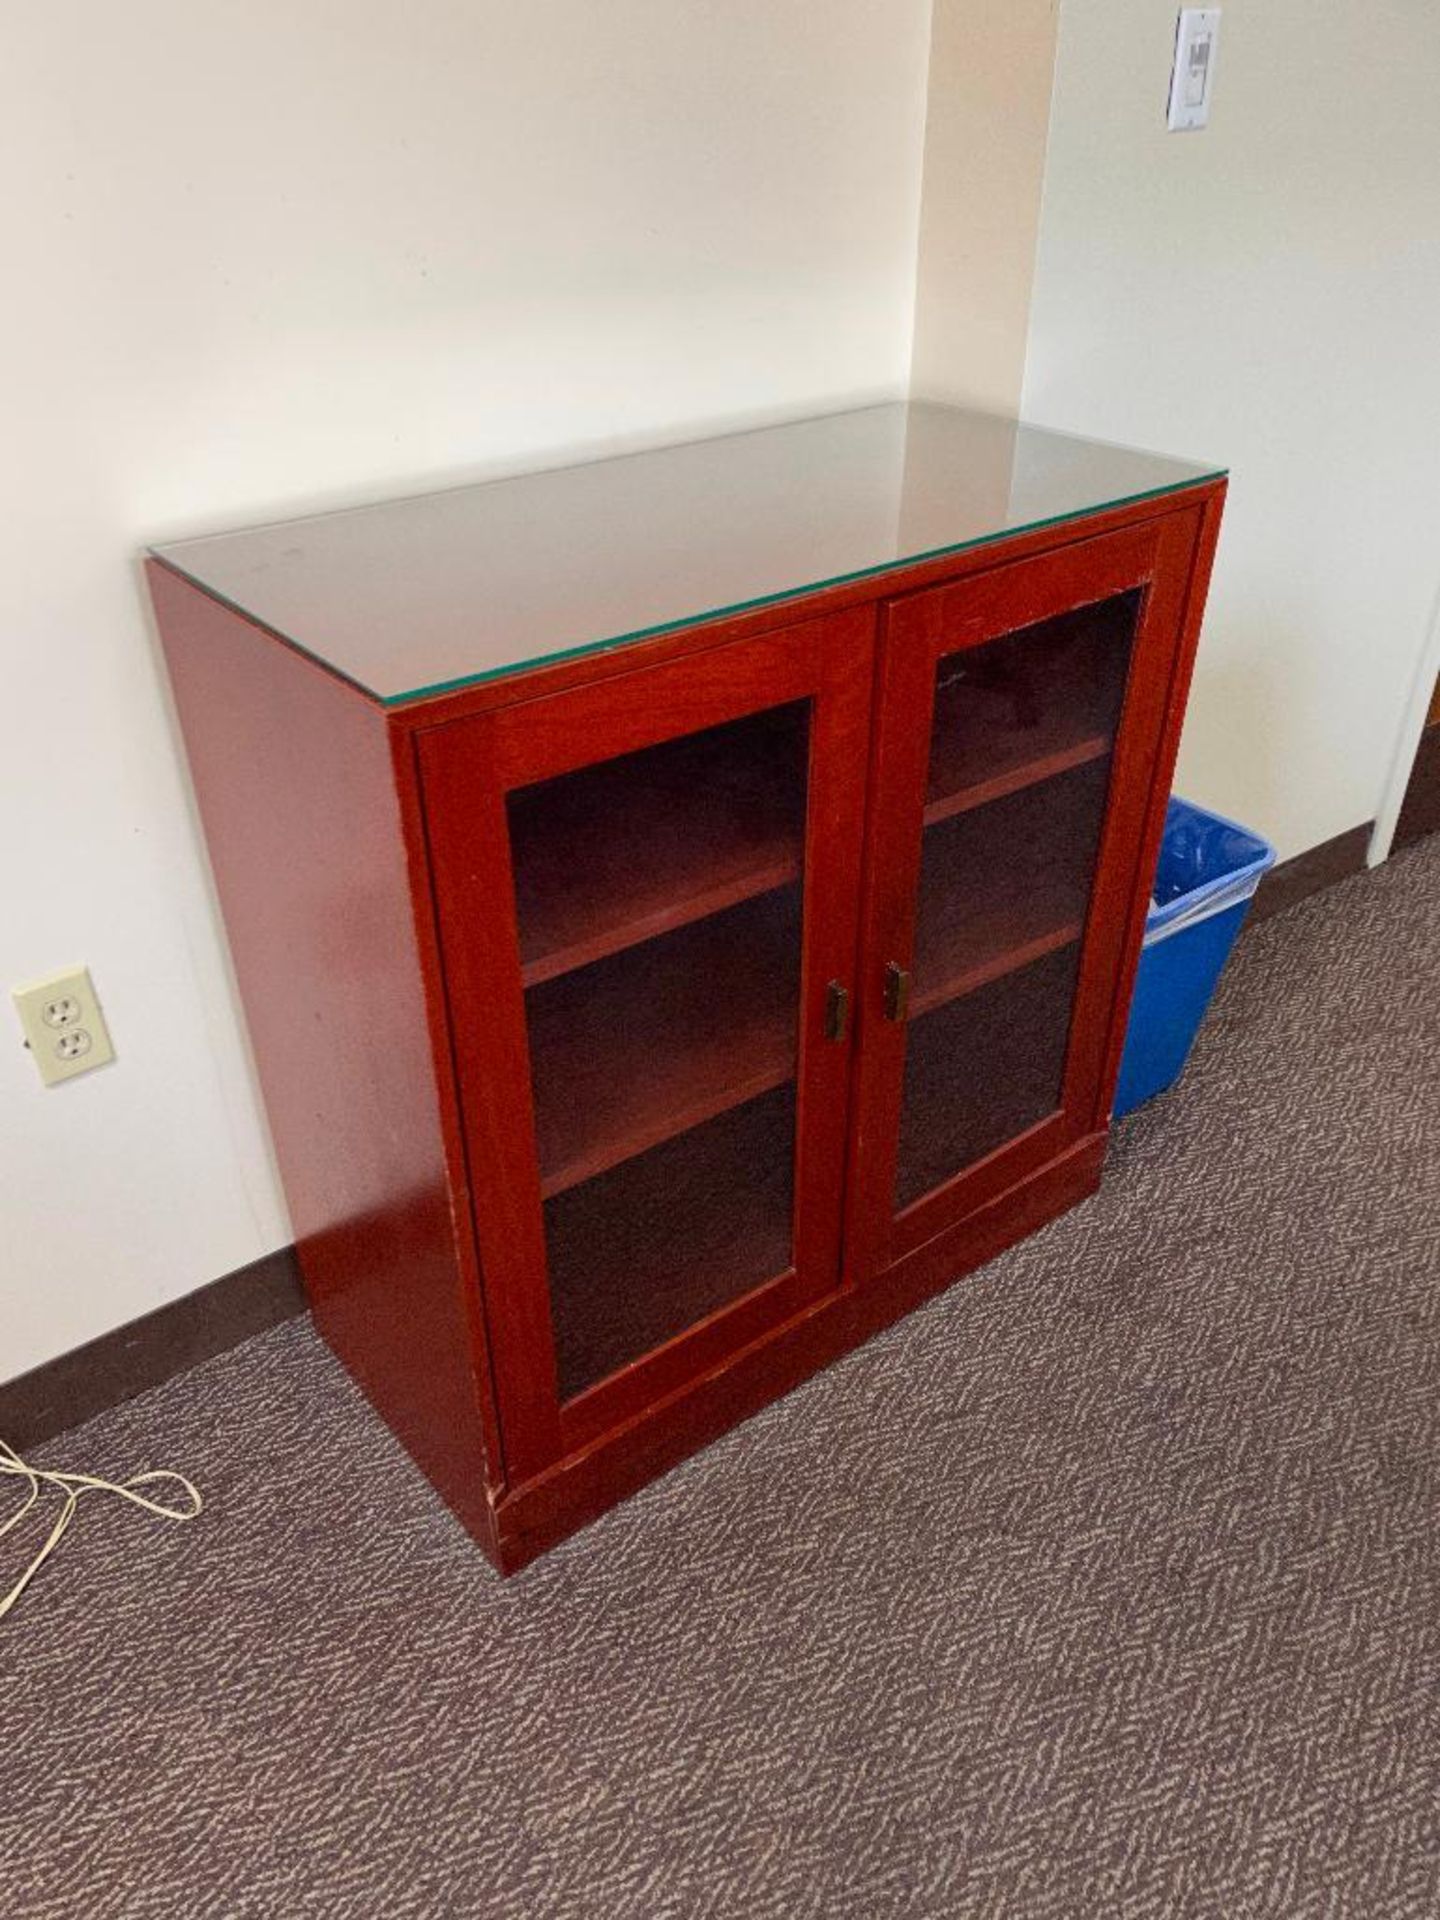 DESCRIPTION: (4) - 8 FT. BOOK SHELVES WITH ADDITIONAL MATCHING CABINETS ADDITIONAL INFORMATION: SEE - Image 10 of 10